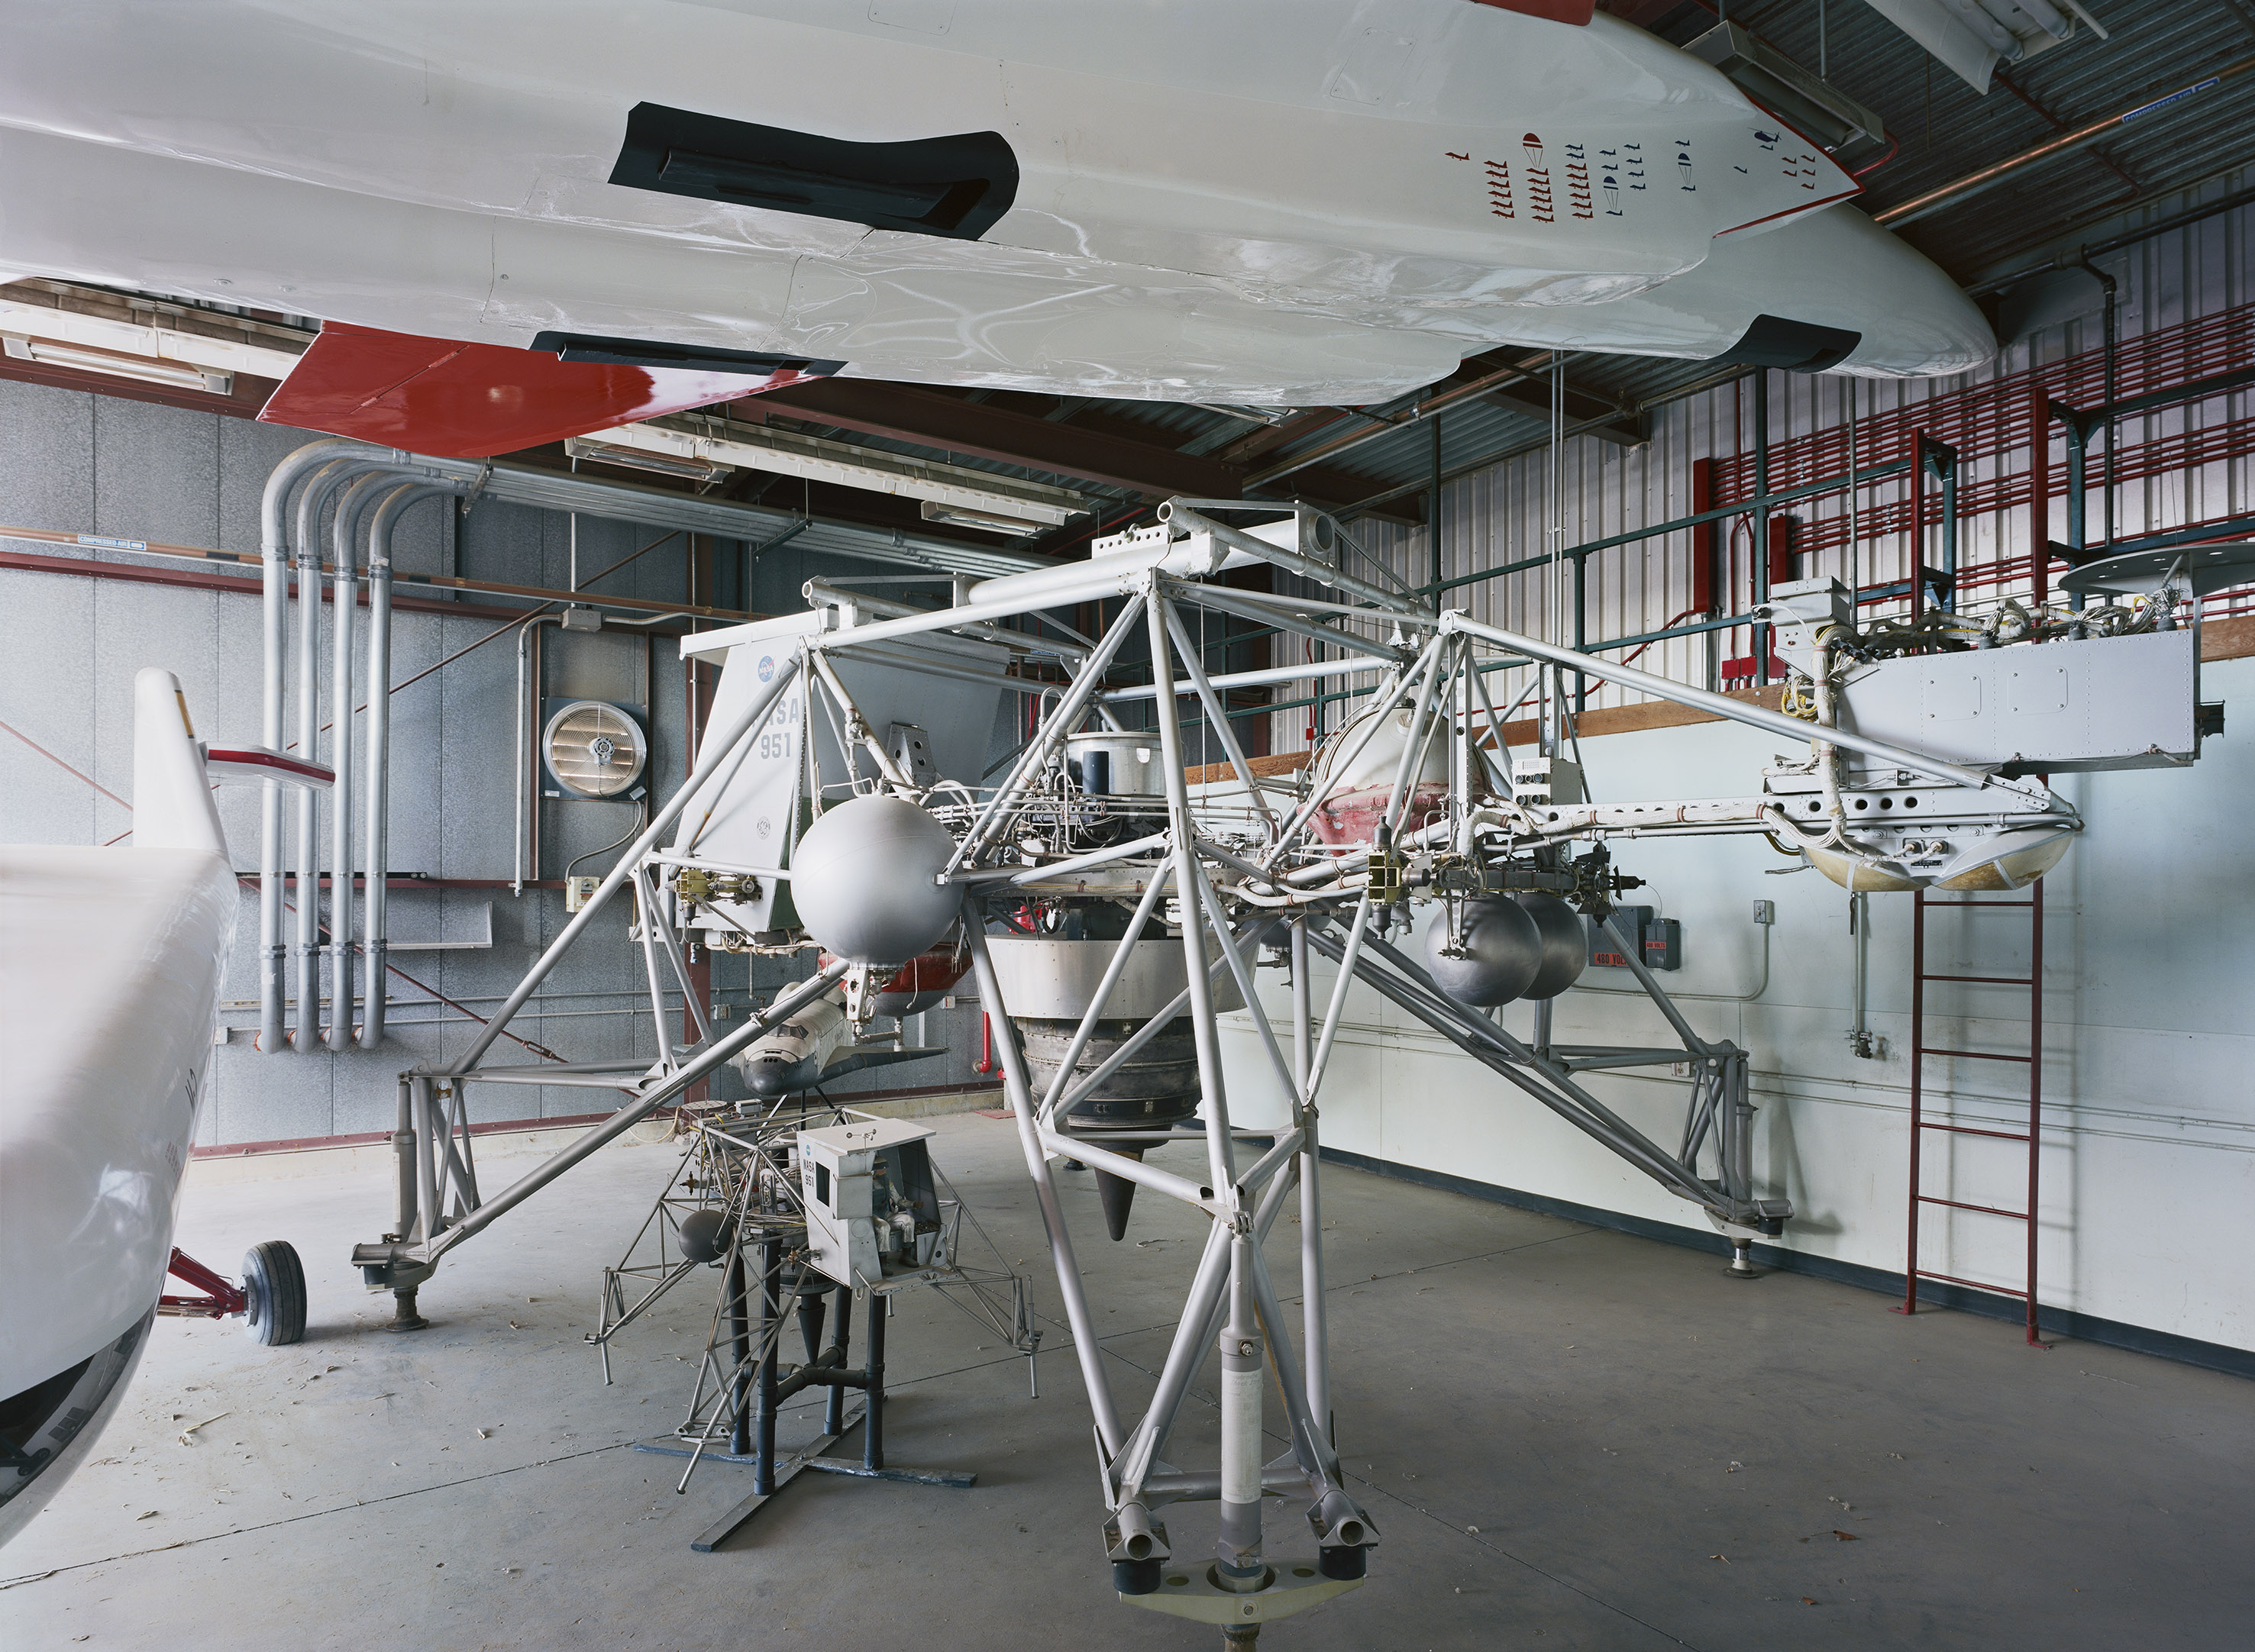 Research Vehicle, Armstrong Flight Research Center, Edwards 2014 © Thomas Struth